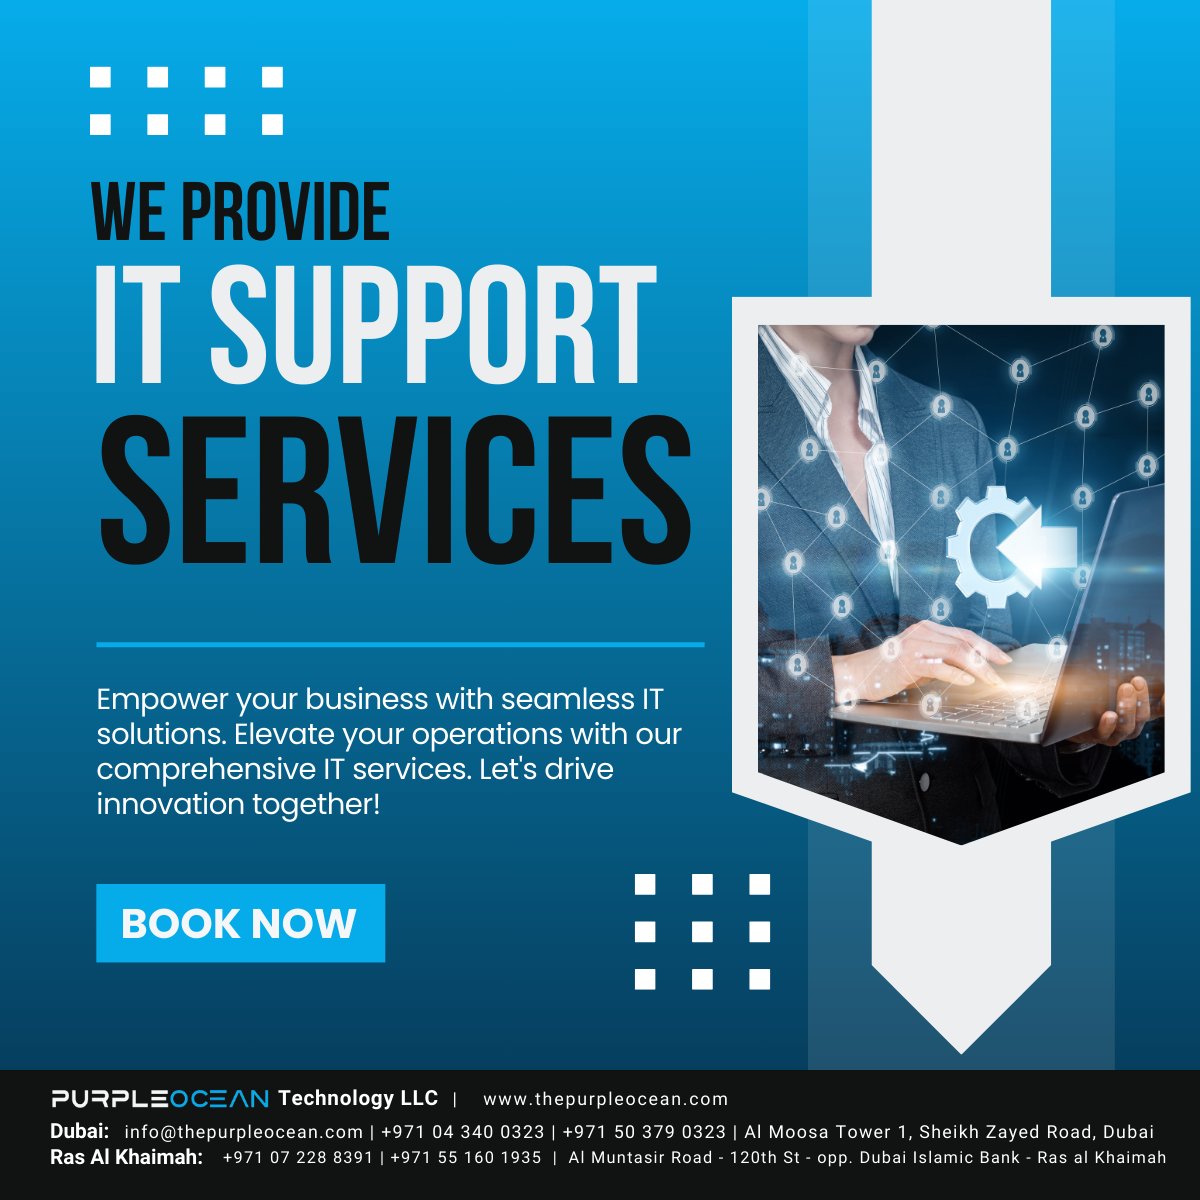 Empowering your #business with seamless #IT #solutions. 

#purpleoceantechnology #technology #itservicesprovider #itservices #itservicescompany #cloudsolutions #azuresupport #itsupport #AMC #annualmaintenance #serversupport #wirelesssolutions #AnnualMaintenanceContract #dubai